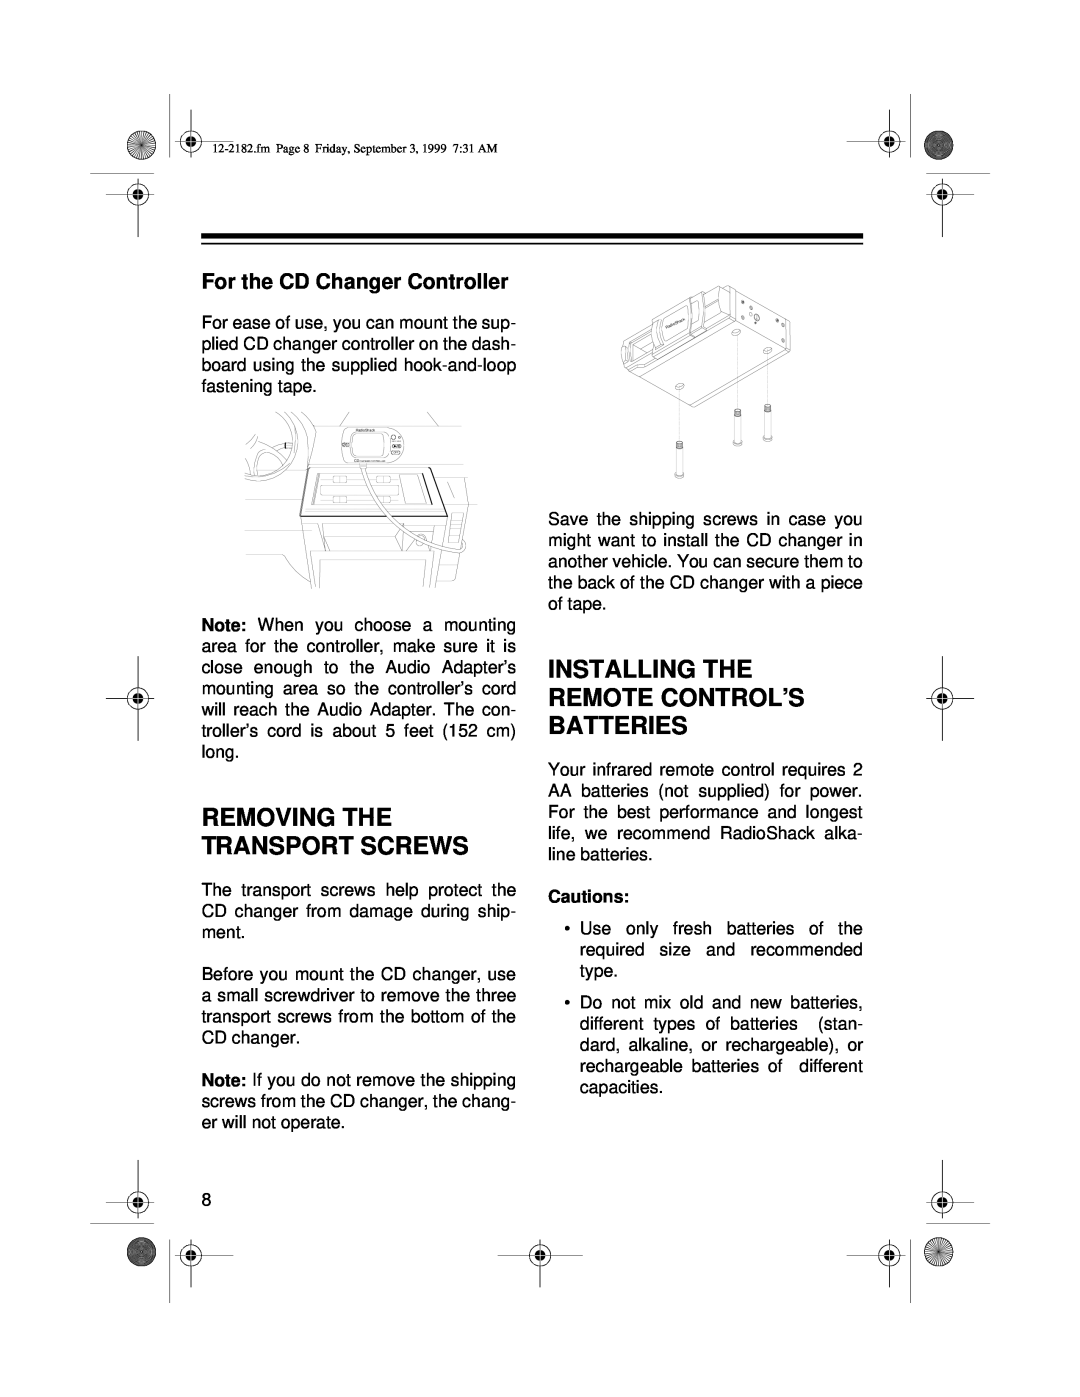 Radio Shack 10 Disc CD Changer owner manual Removing The Transport Screws, For the CD Changer Controller 